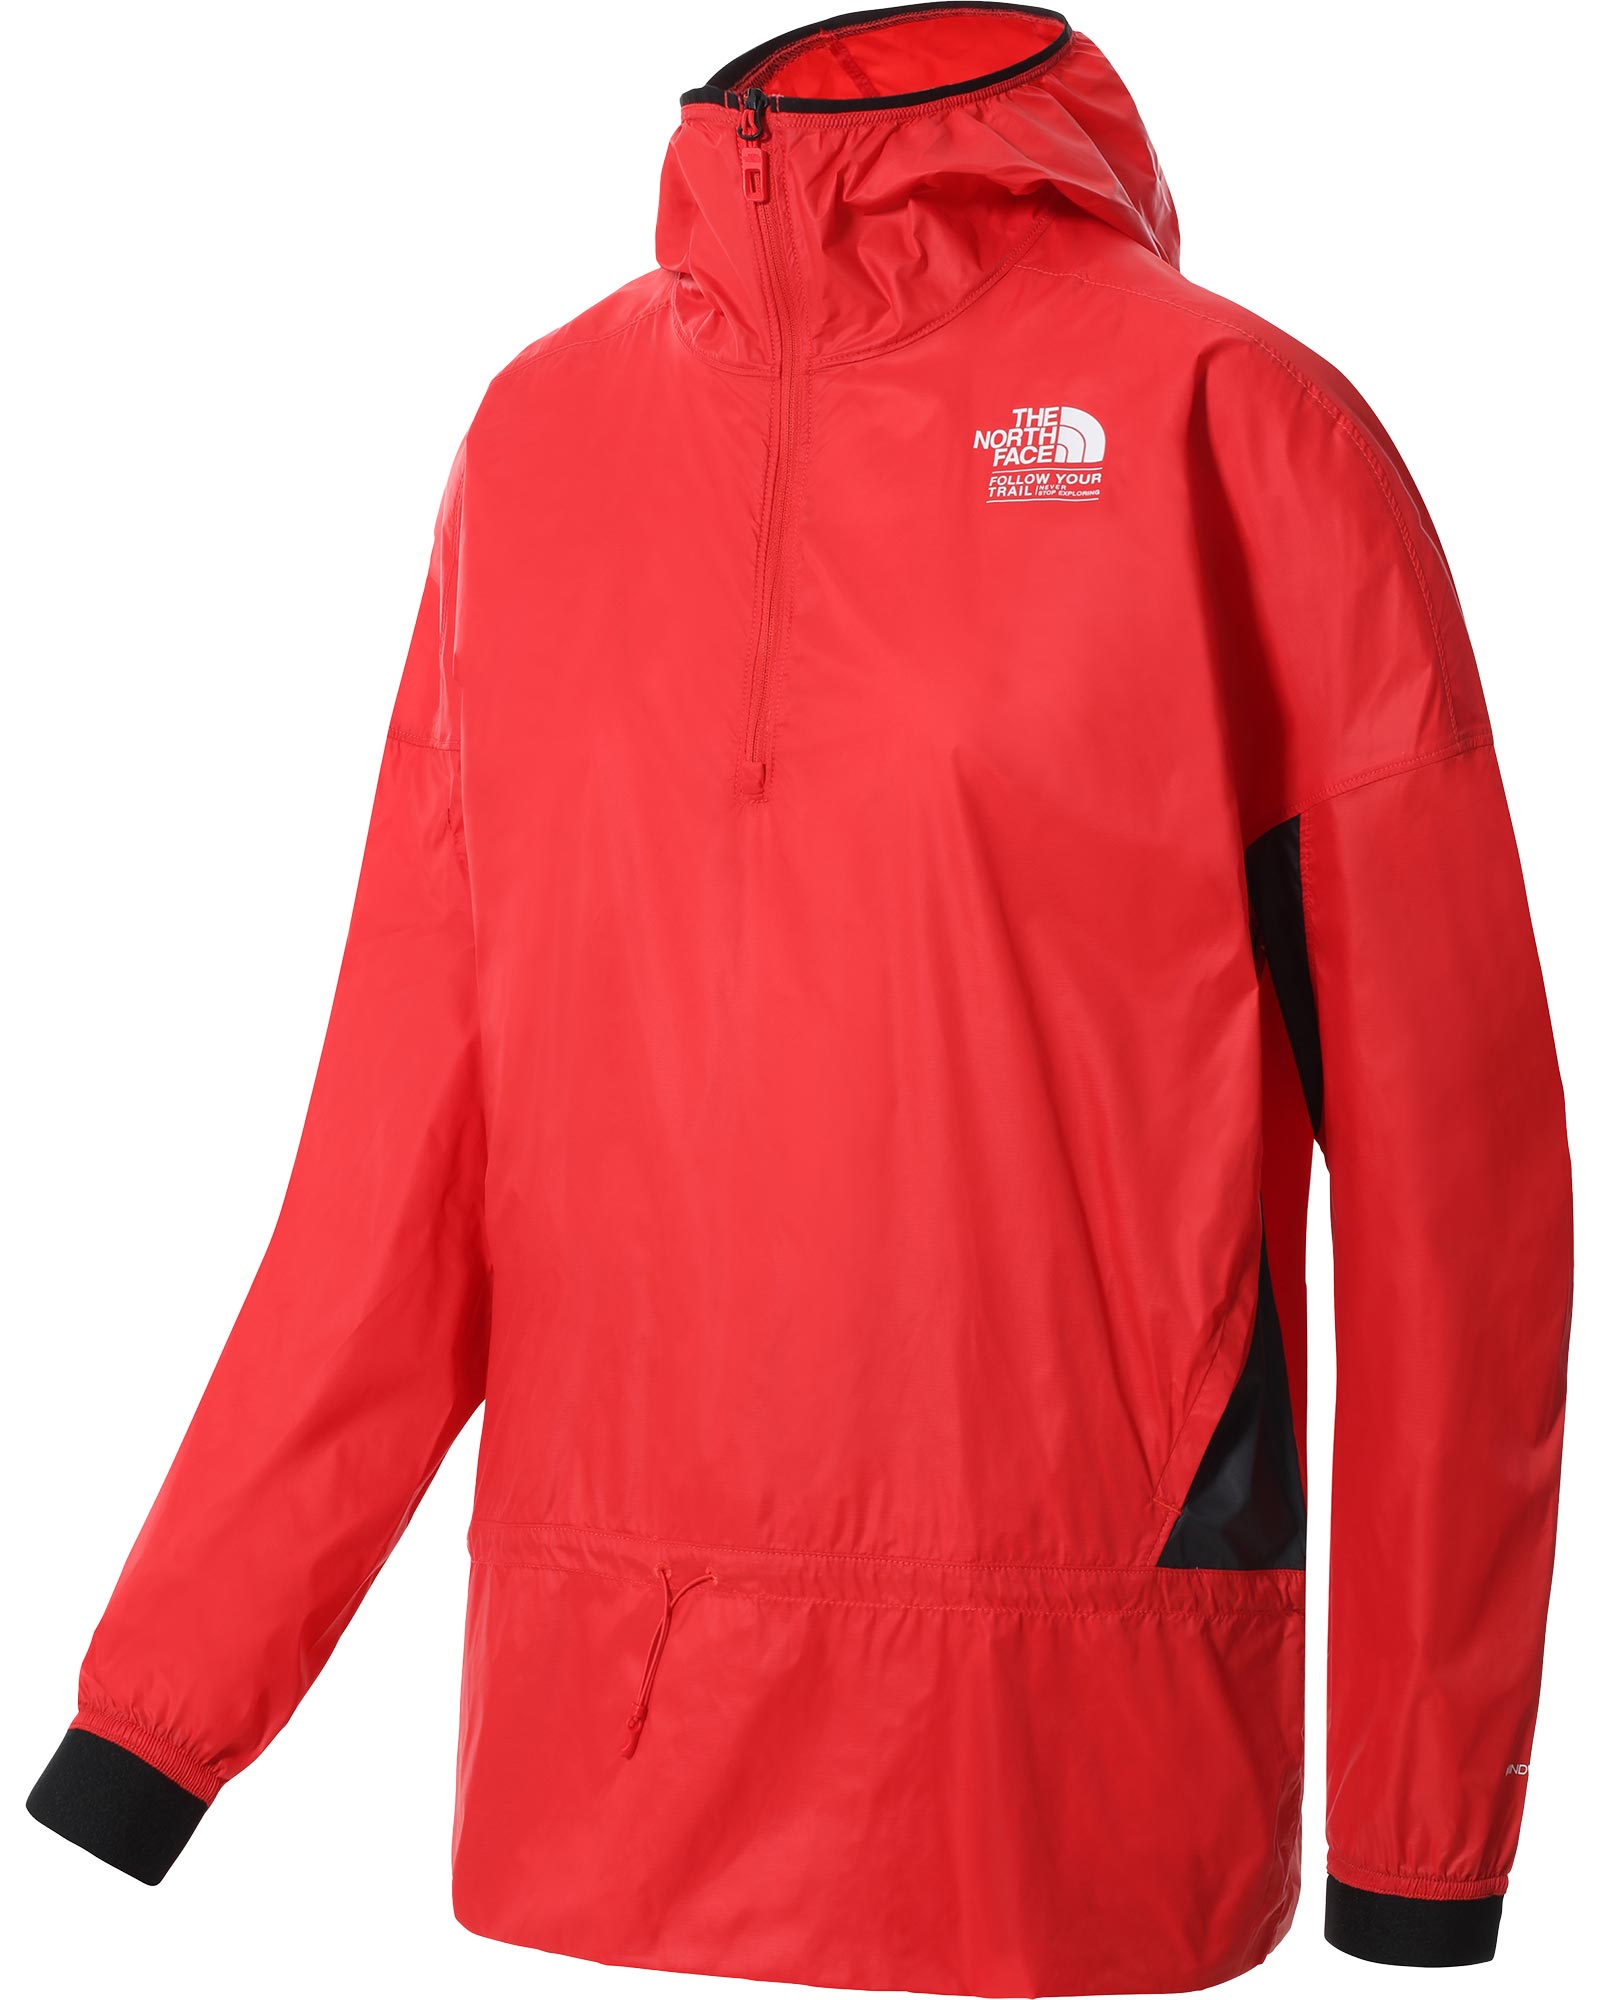 The North Face AO Women’s Wind Jacket - Horizon Red M